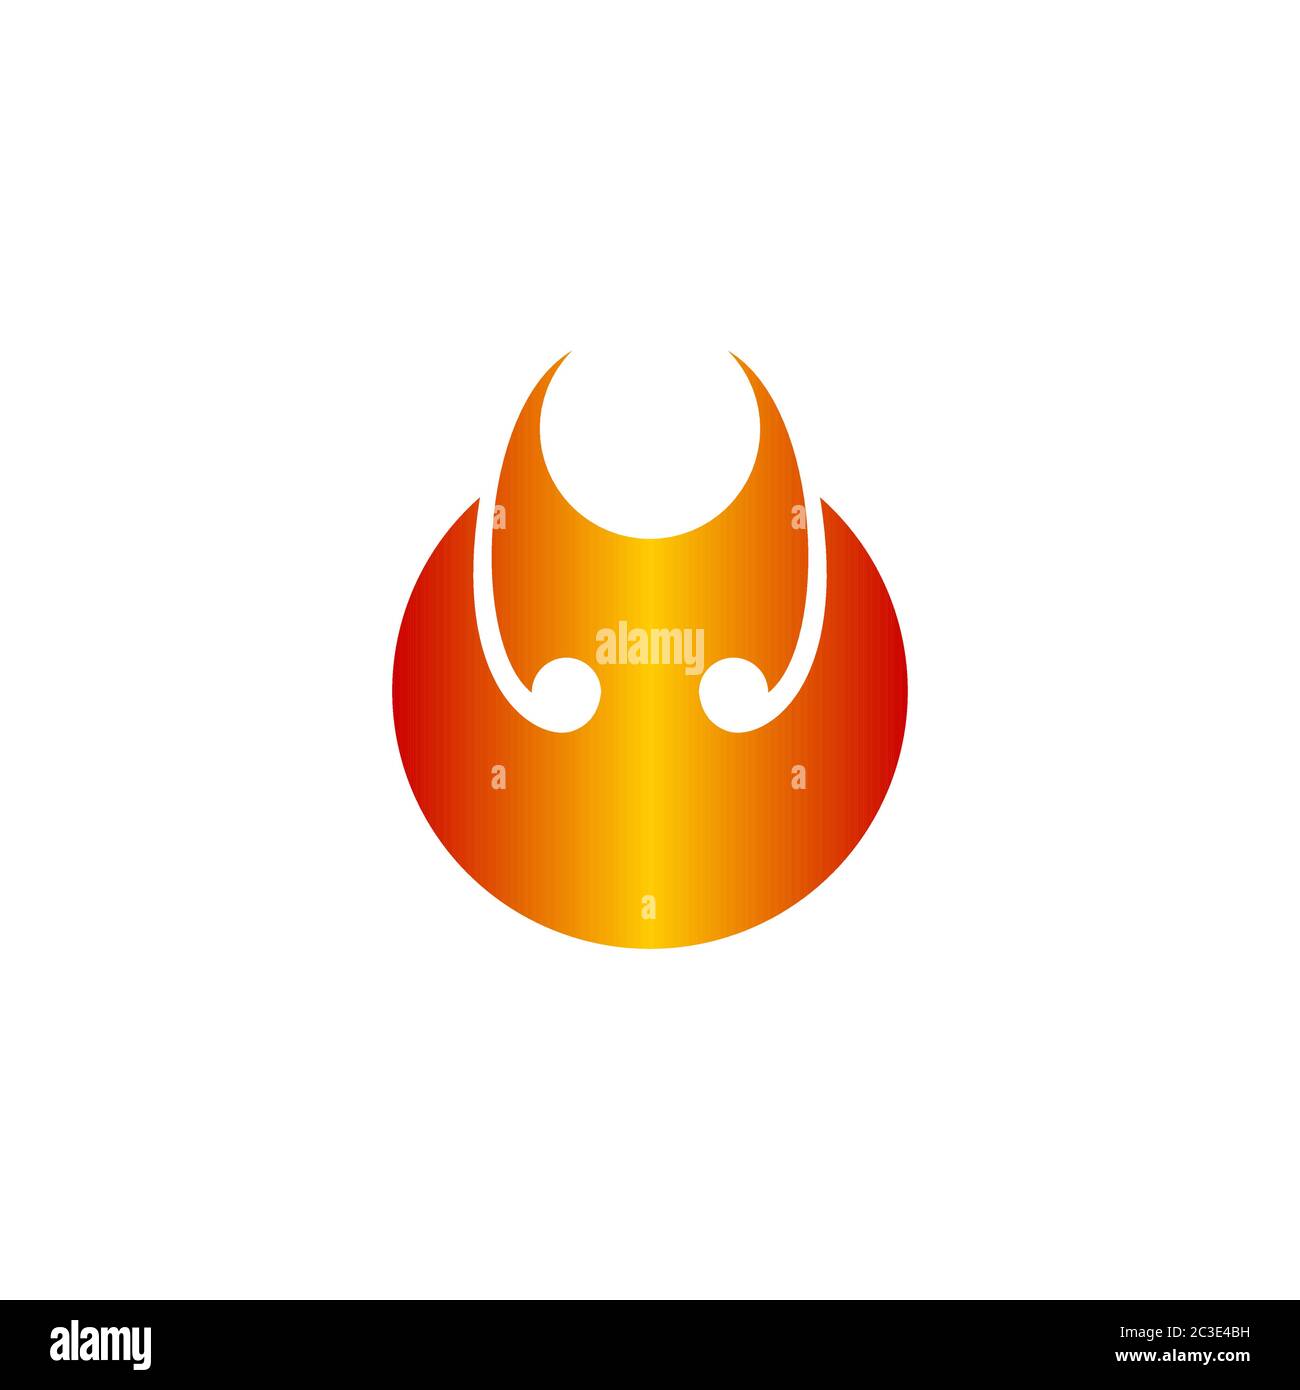 Abstract fire logo design concept, vector illustration of a fire with gradient color, isolated on white background. Stock Vector